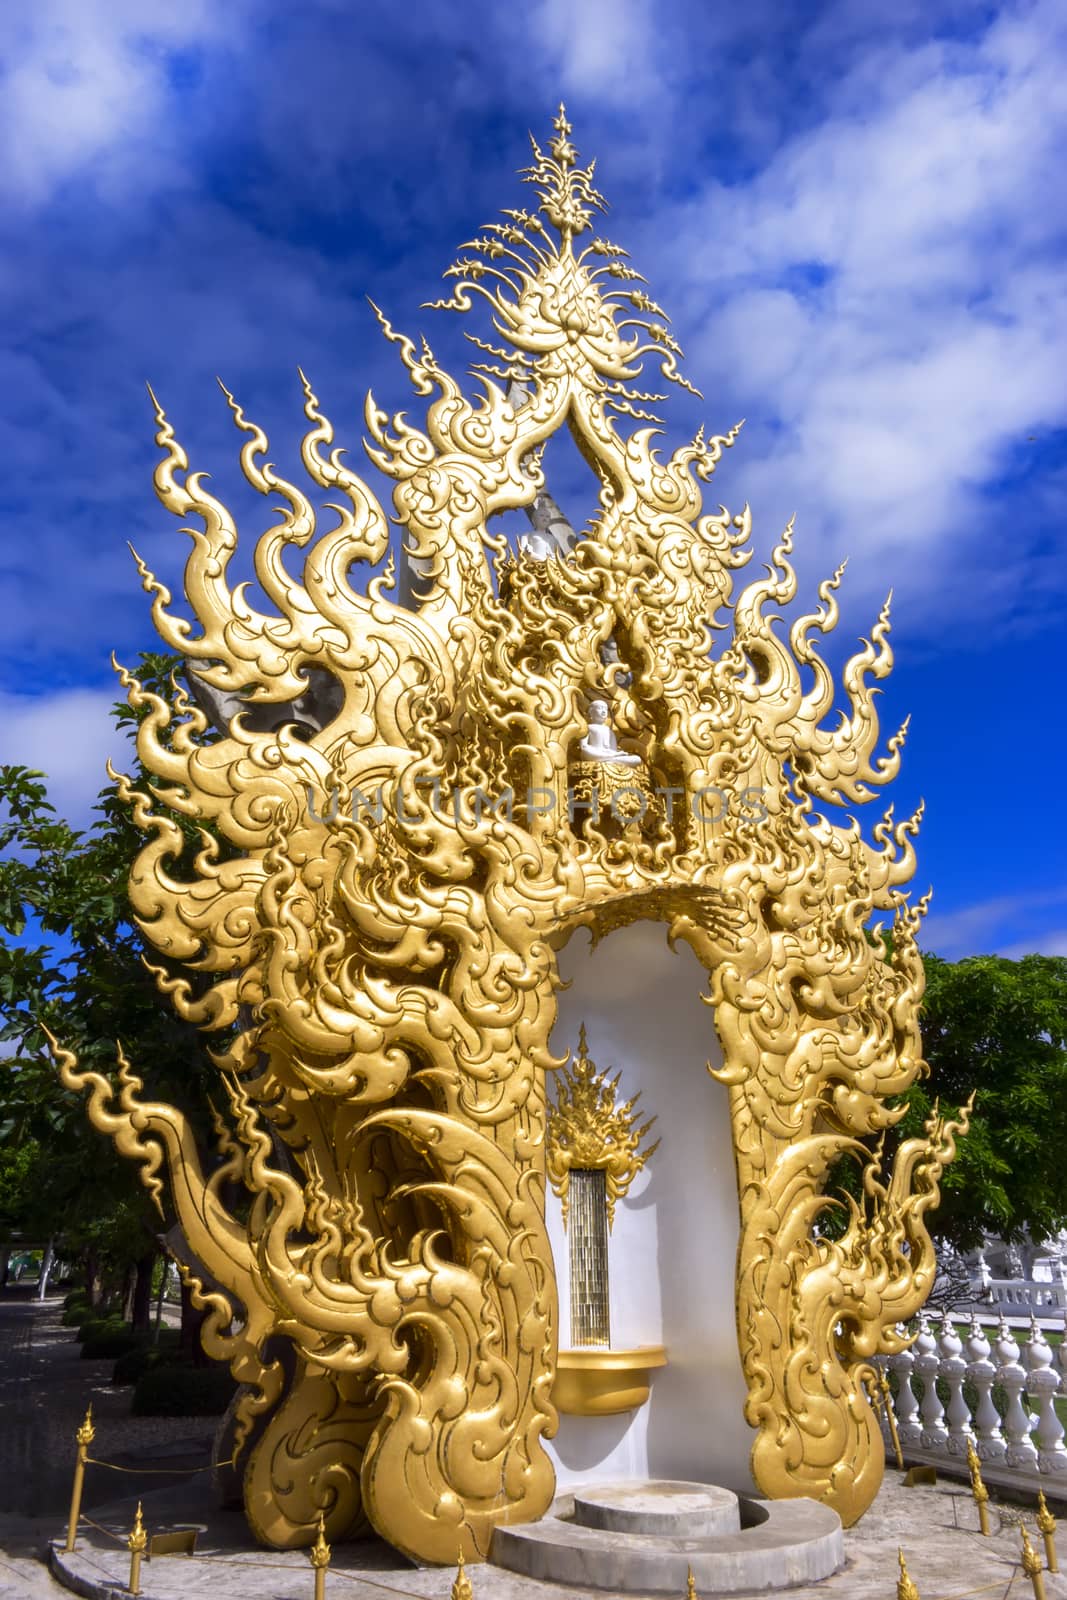 White Temple Architectural Details, is a contemporary unconventional Buddhist temple in Chiang Rai, Thailand.